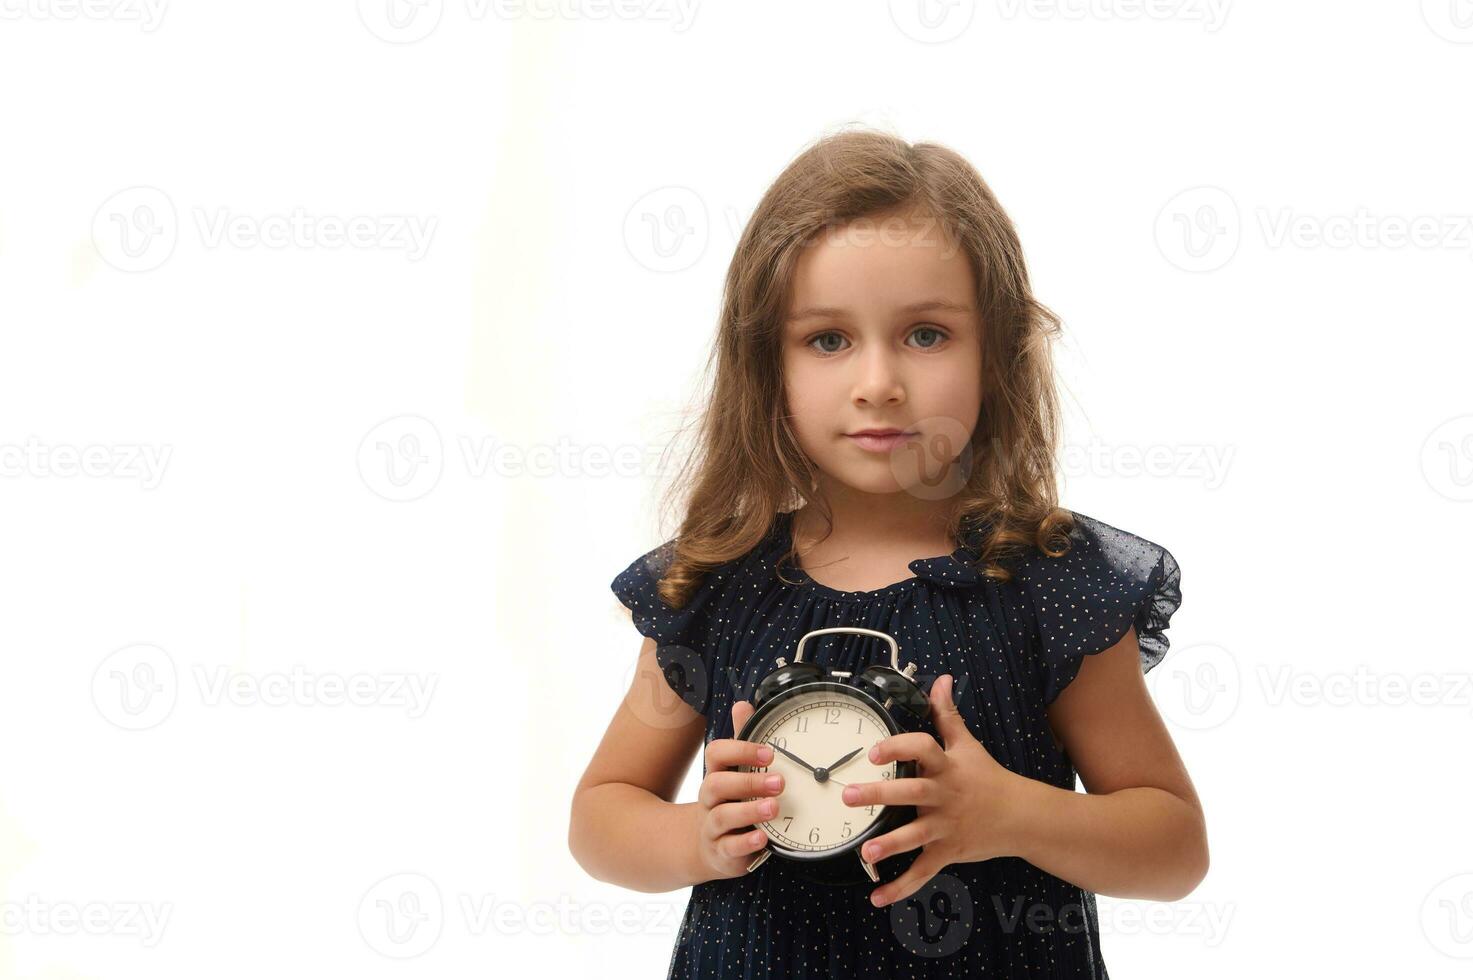 Adorable pretty 4 years old baby girl dressed in stylish dark blue evening attire, poses looking at the camera with an alarm clock in her hands, isolated against white background with copy space photo